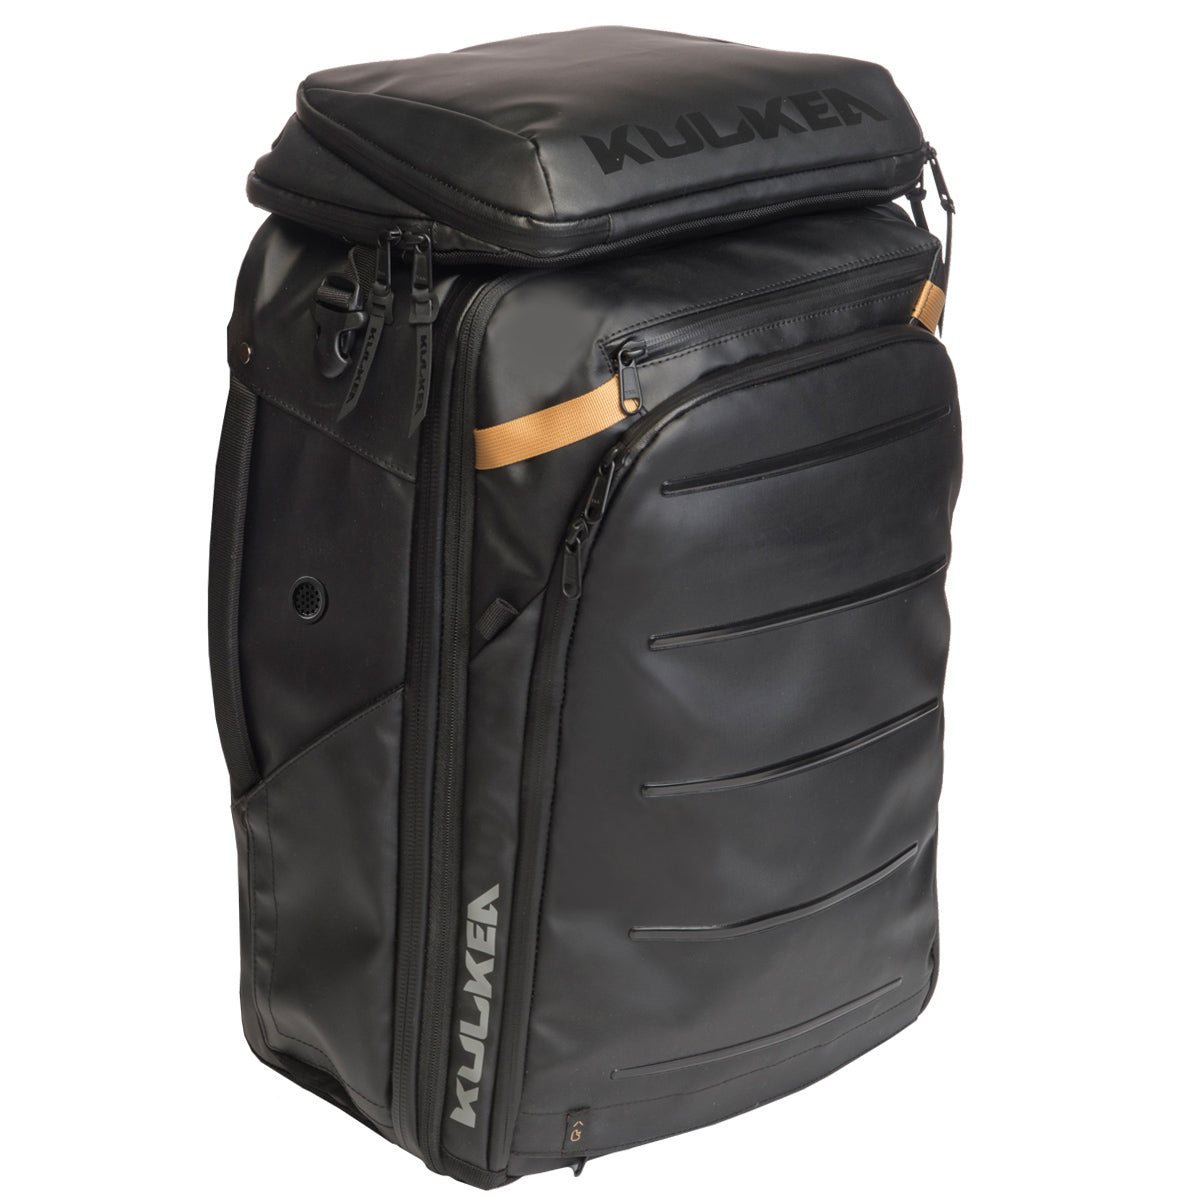 Kulkea travel backpack, all black with tons of compartments. Shoulder straps. Fits ski boots, laptop, and more.